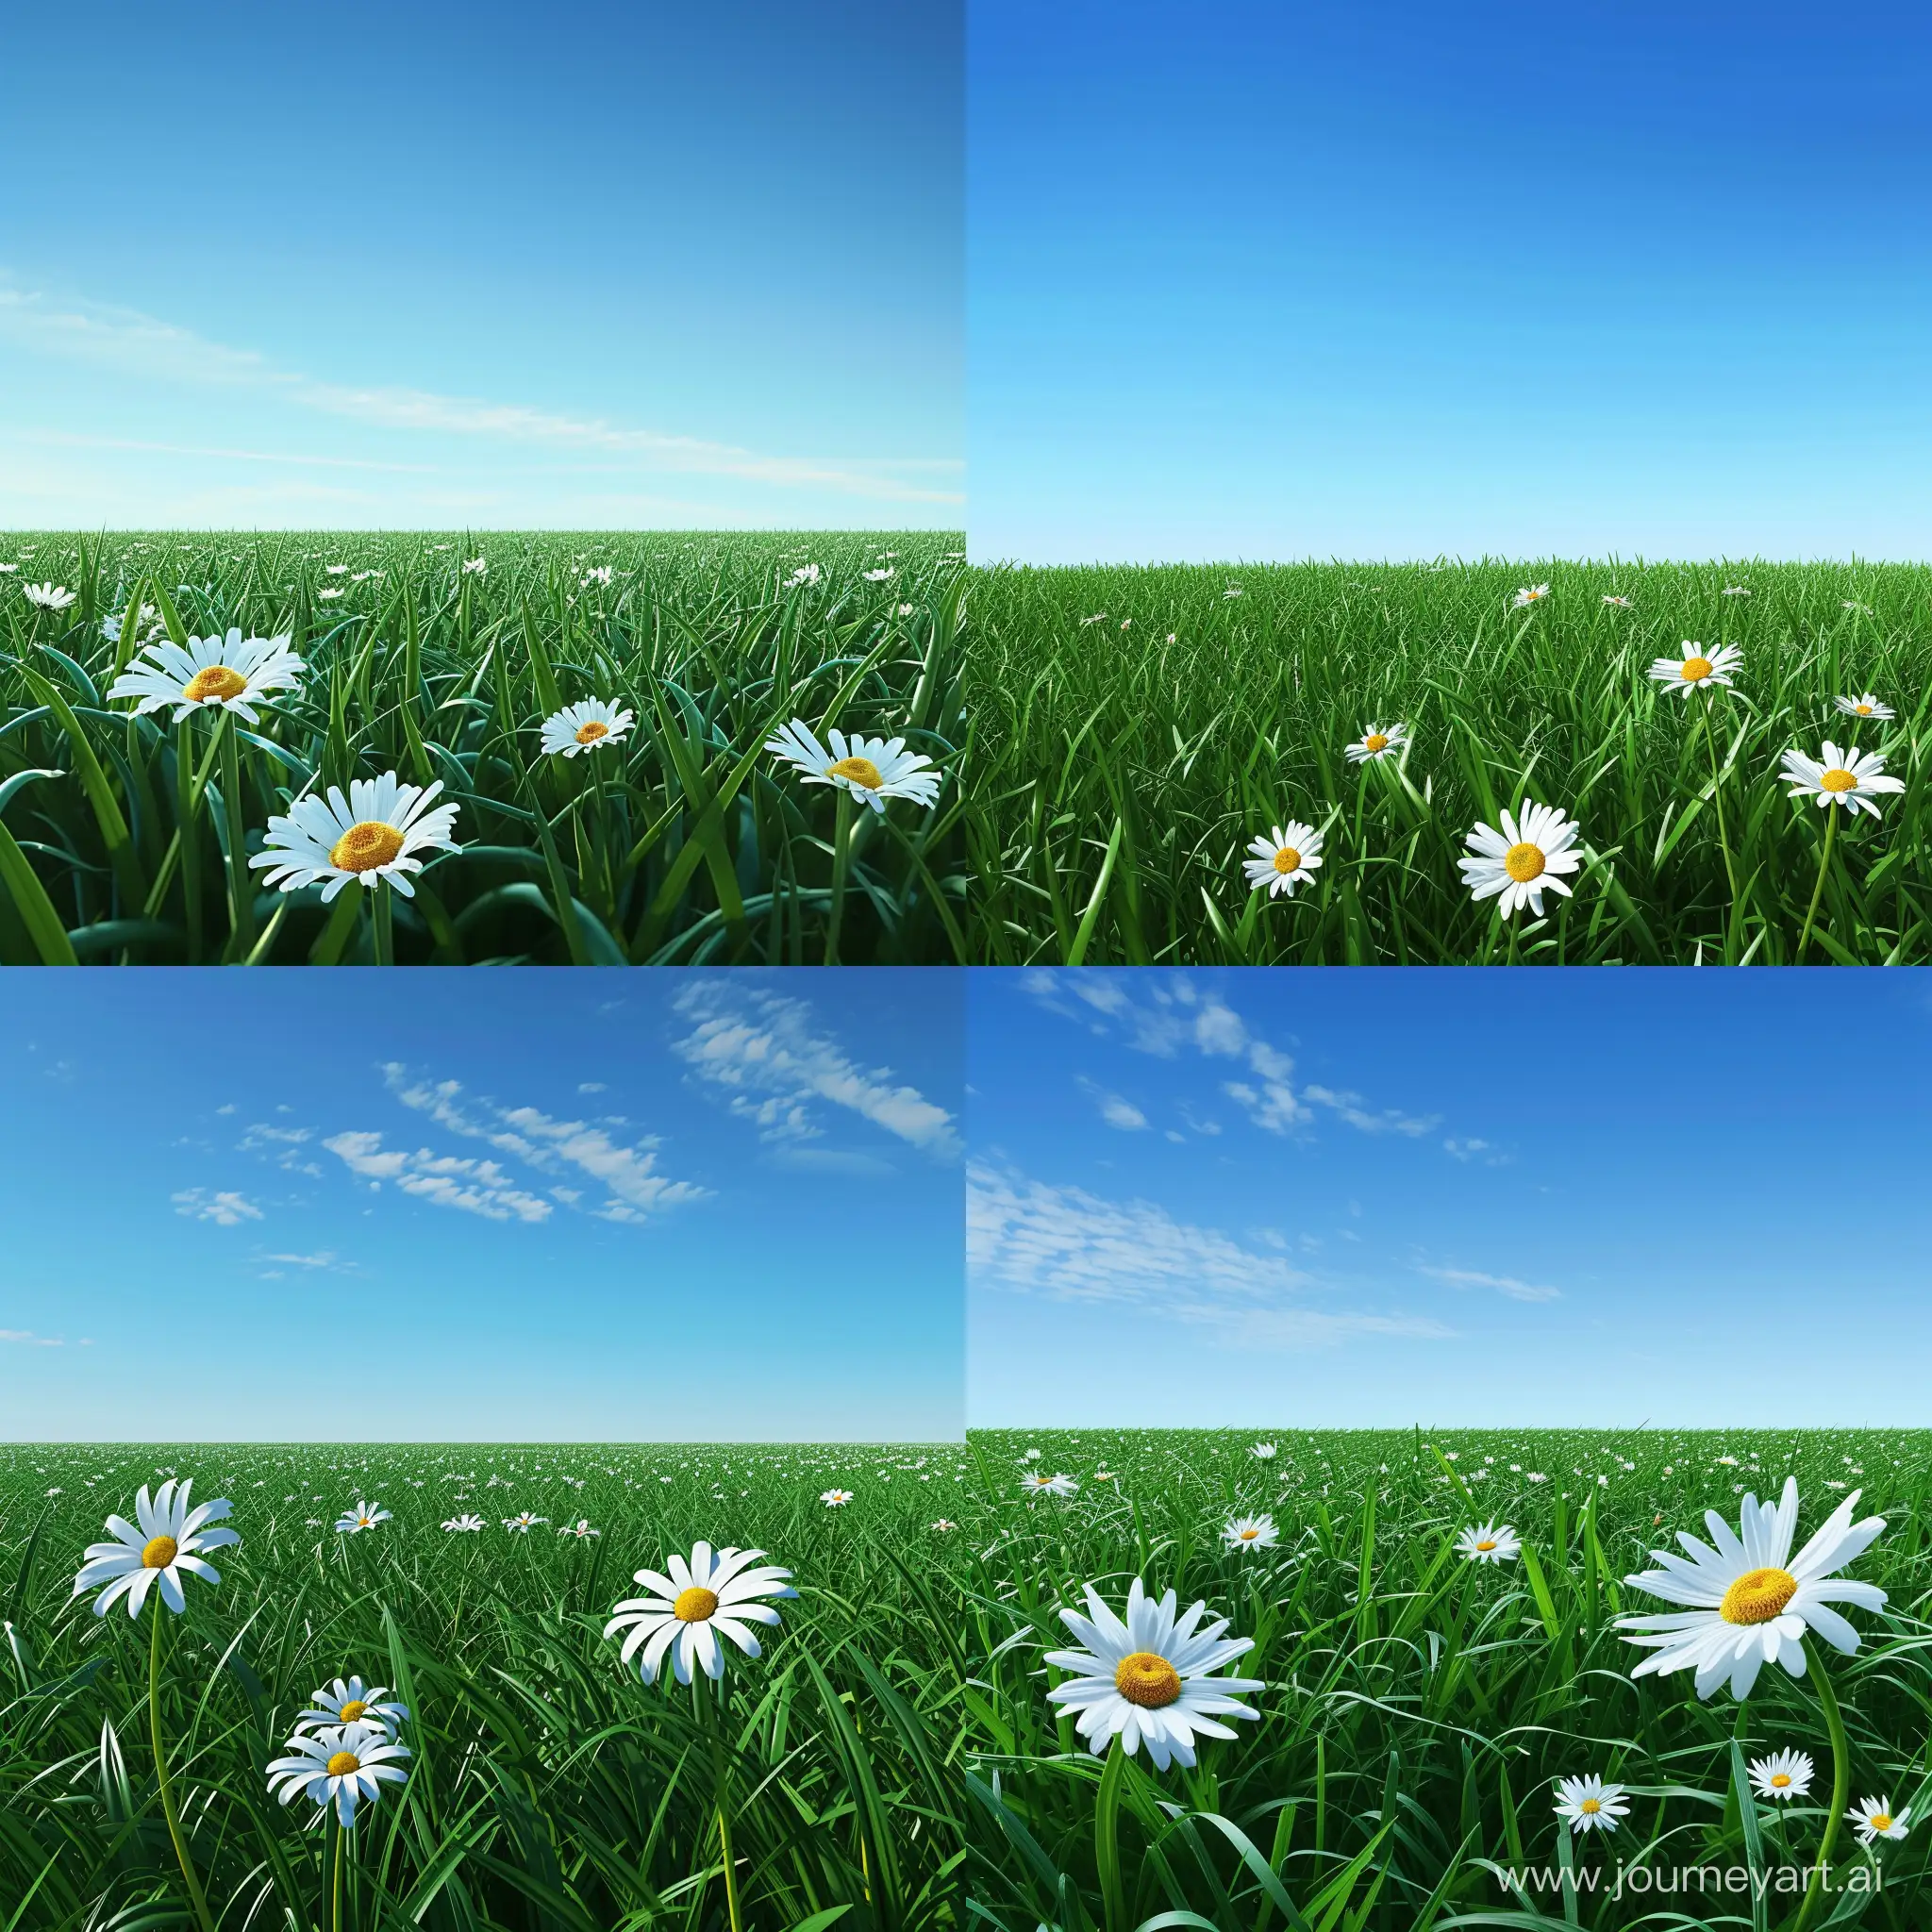 Generate a realistic image of a field of green grass under a clear blue sky, with white daisies scattered throughout the field. The perspective should be low, close to the ground, focusing on some daisies while showing the expanse of the field and sky in the background